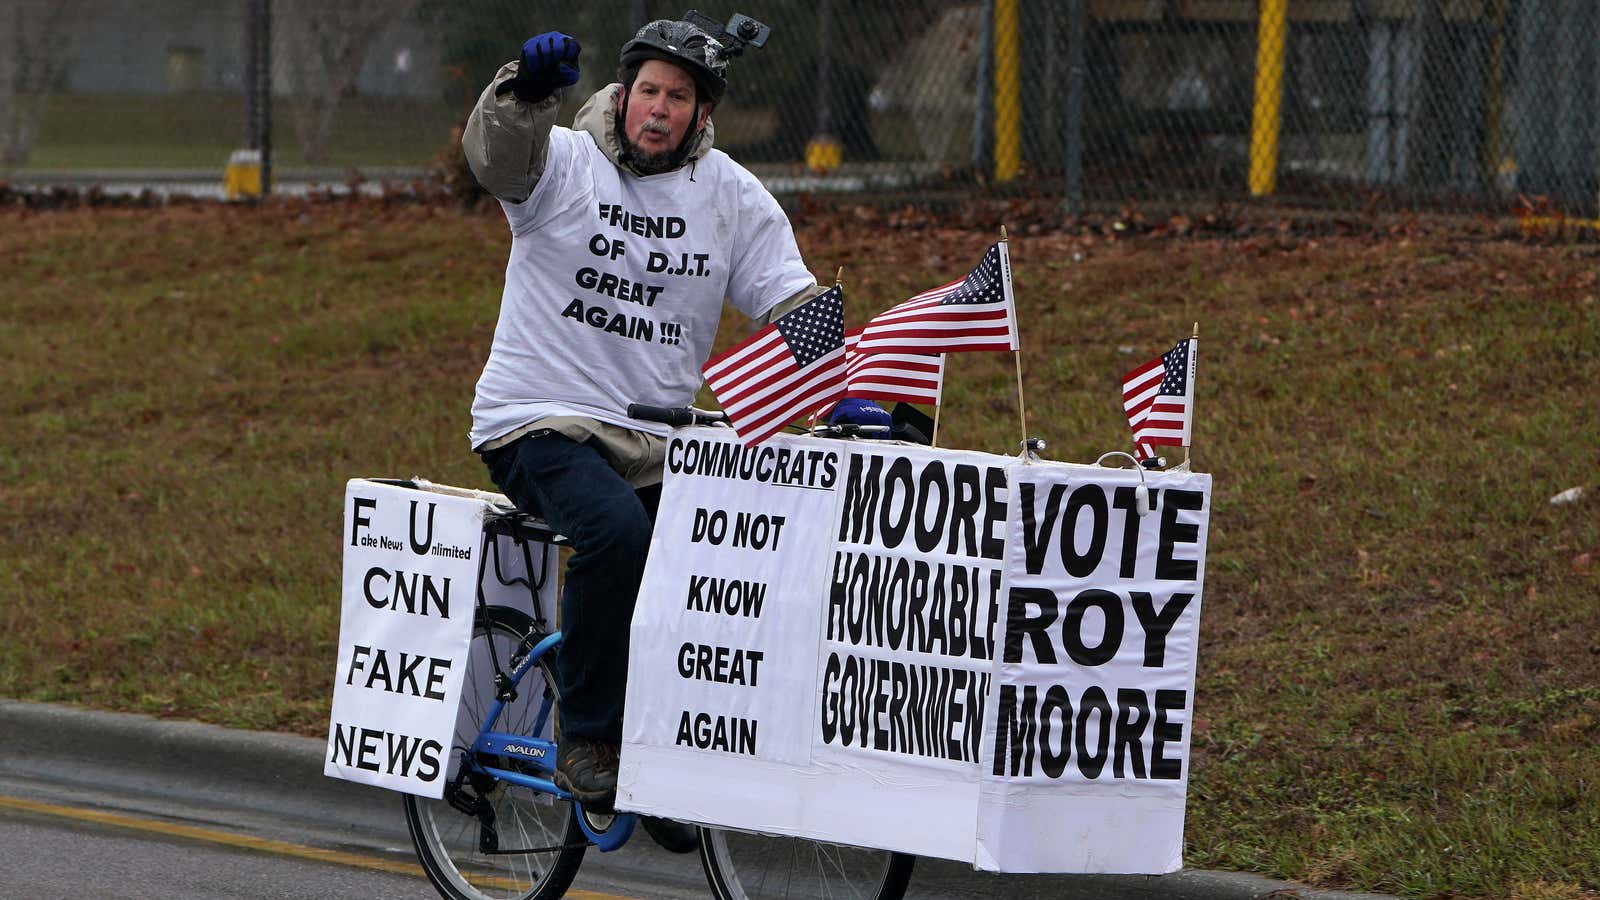 How mainstream is Roy Moore?